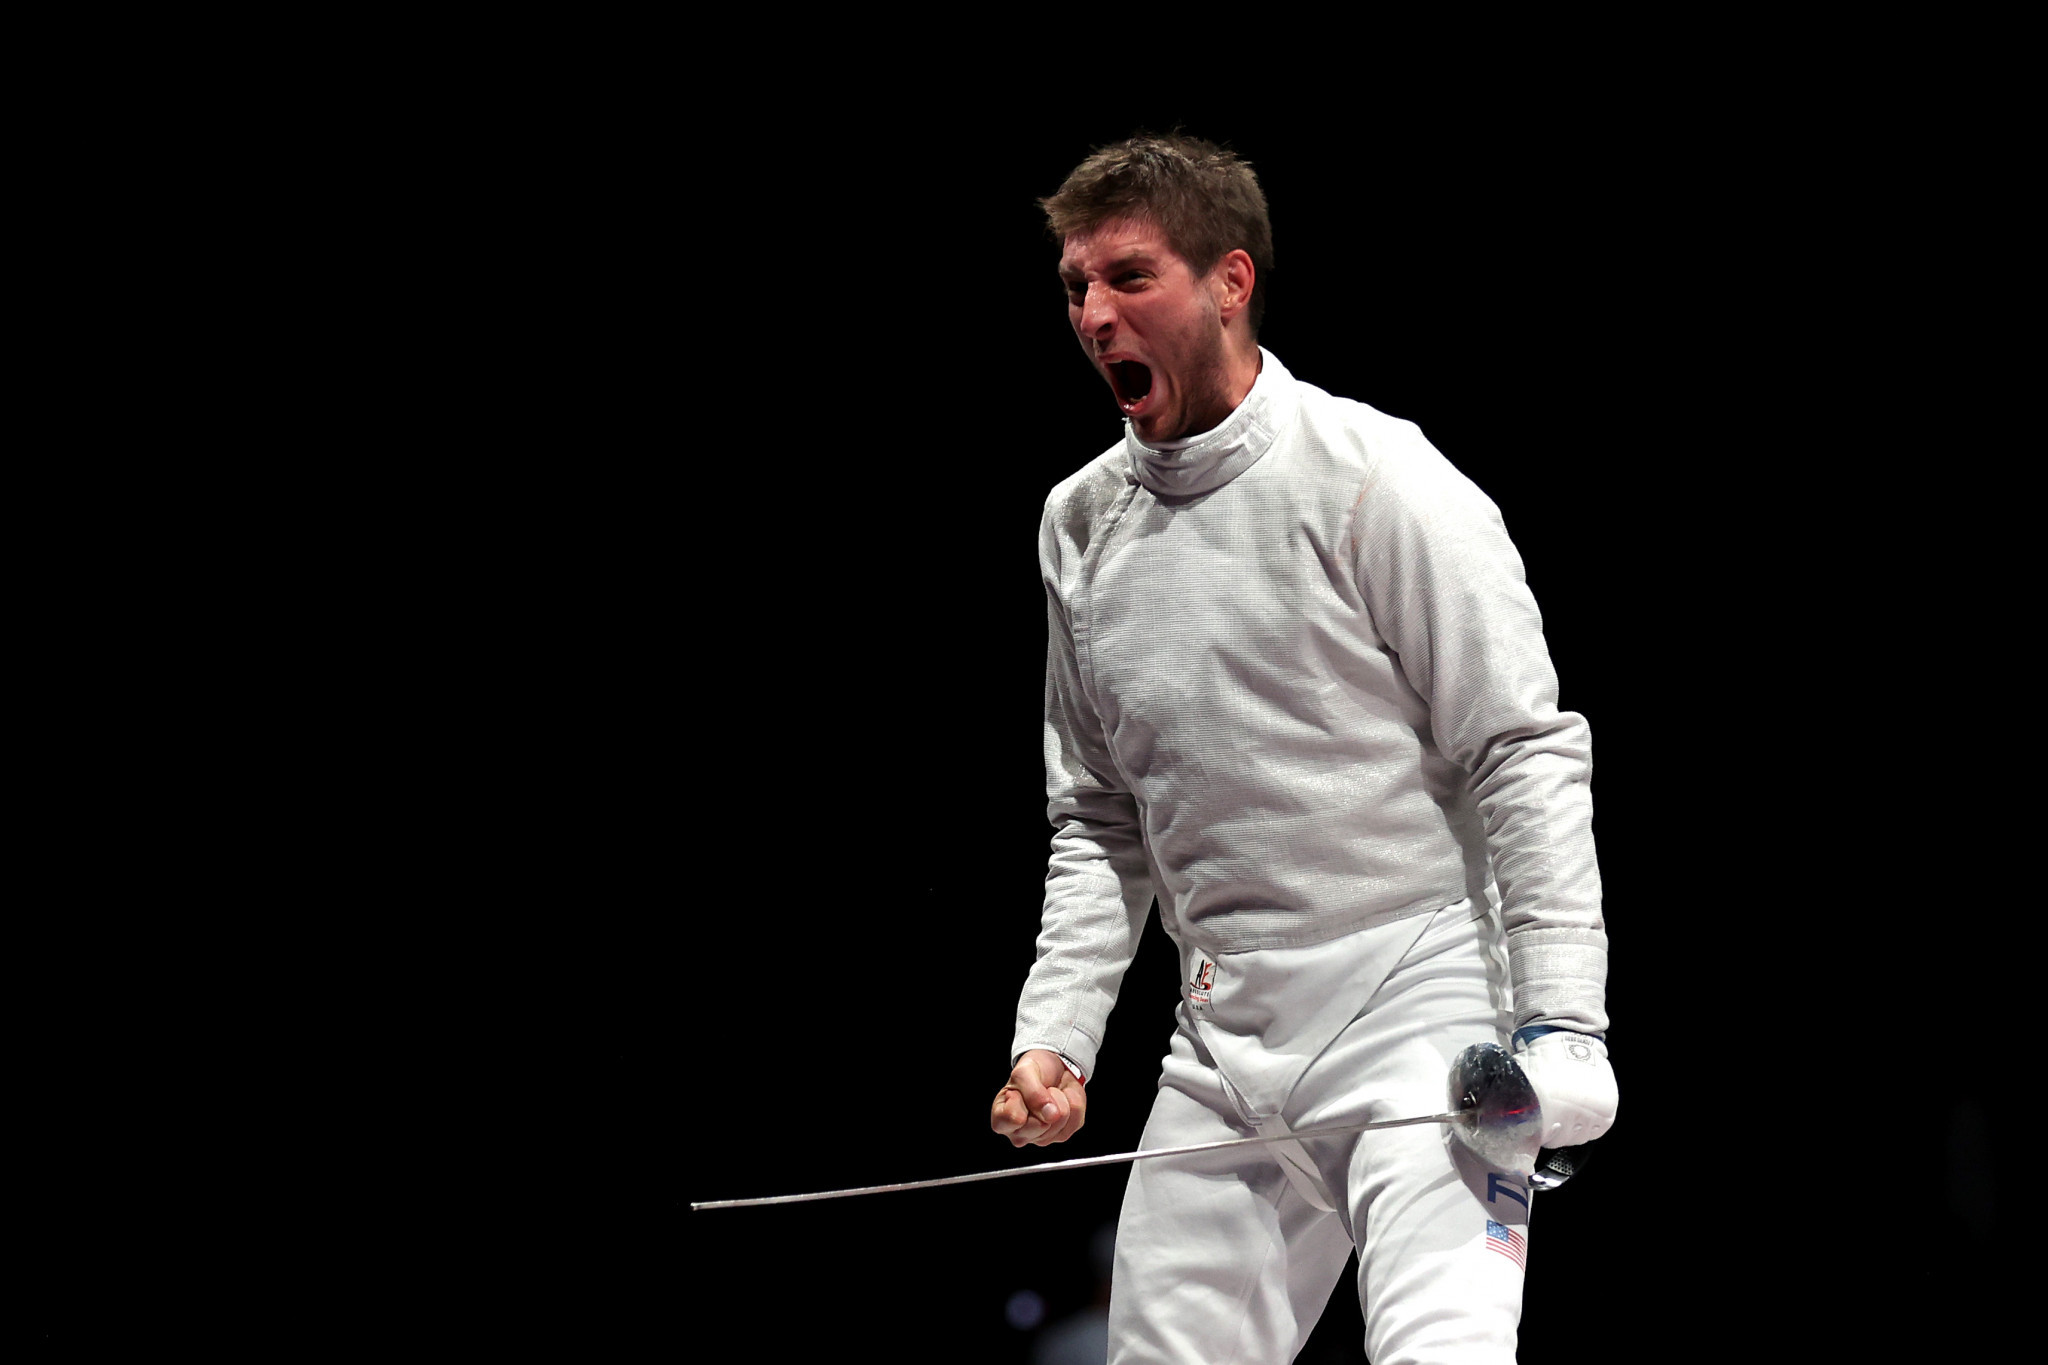 Candassamy and Dershwitz win first golds of FIE Fencing World Championships